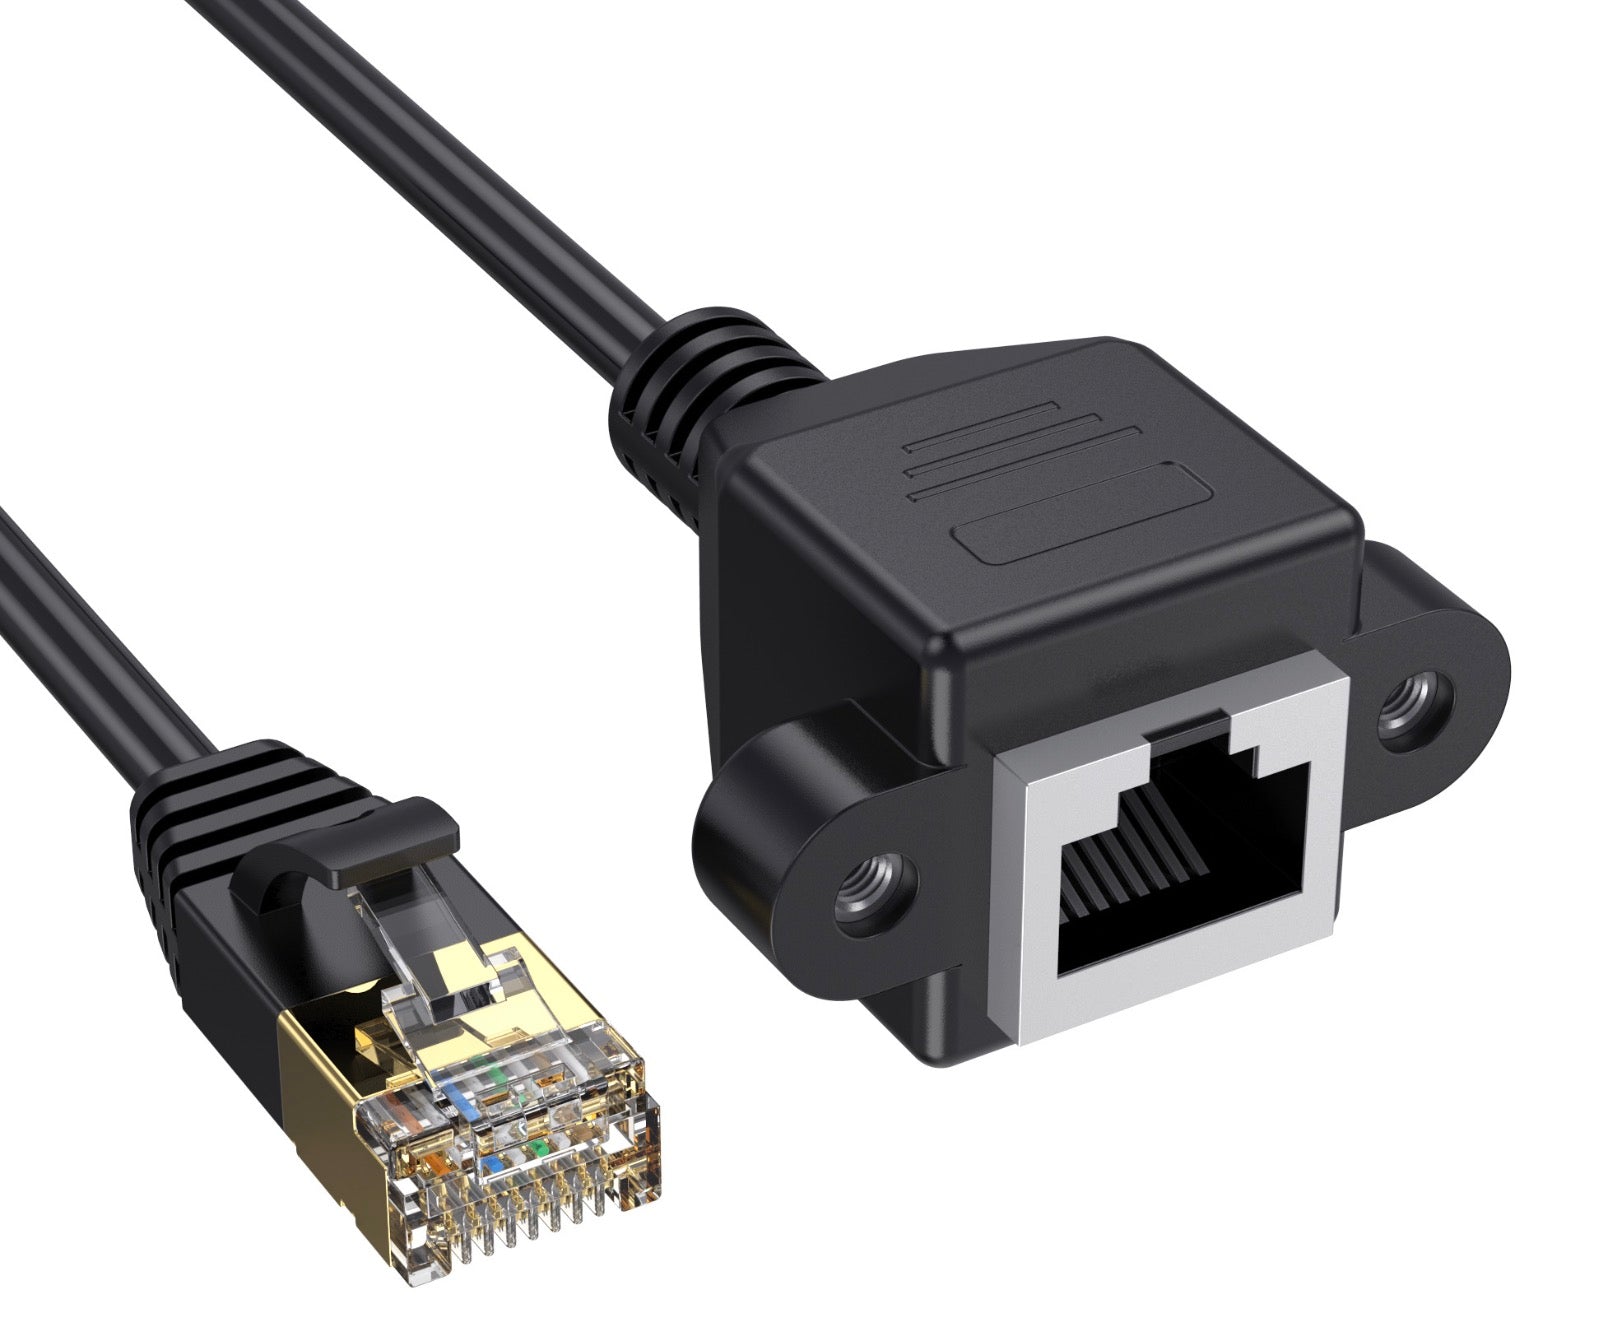 Cat 8 SuperSpeed 40 Gbps RJ45 Ethernet Network Extension Cable Male to Female Panel Mount